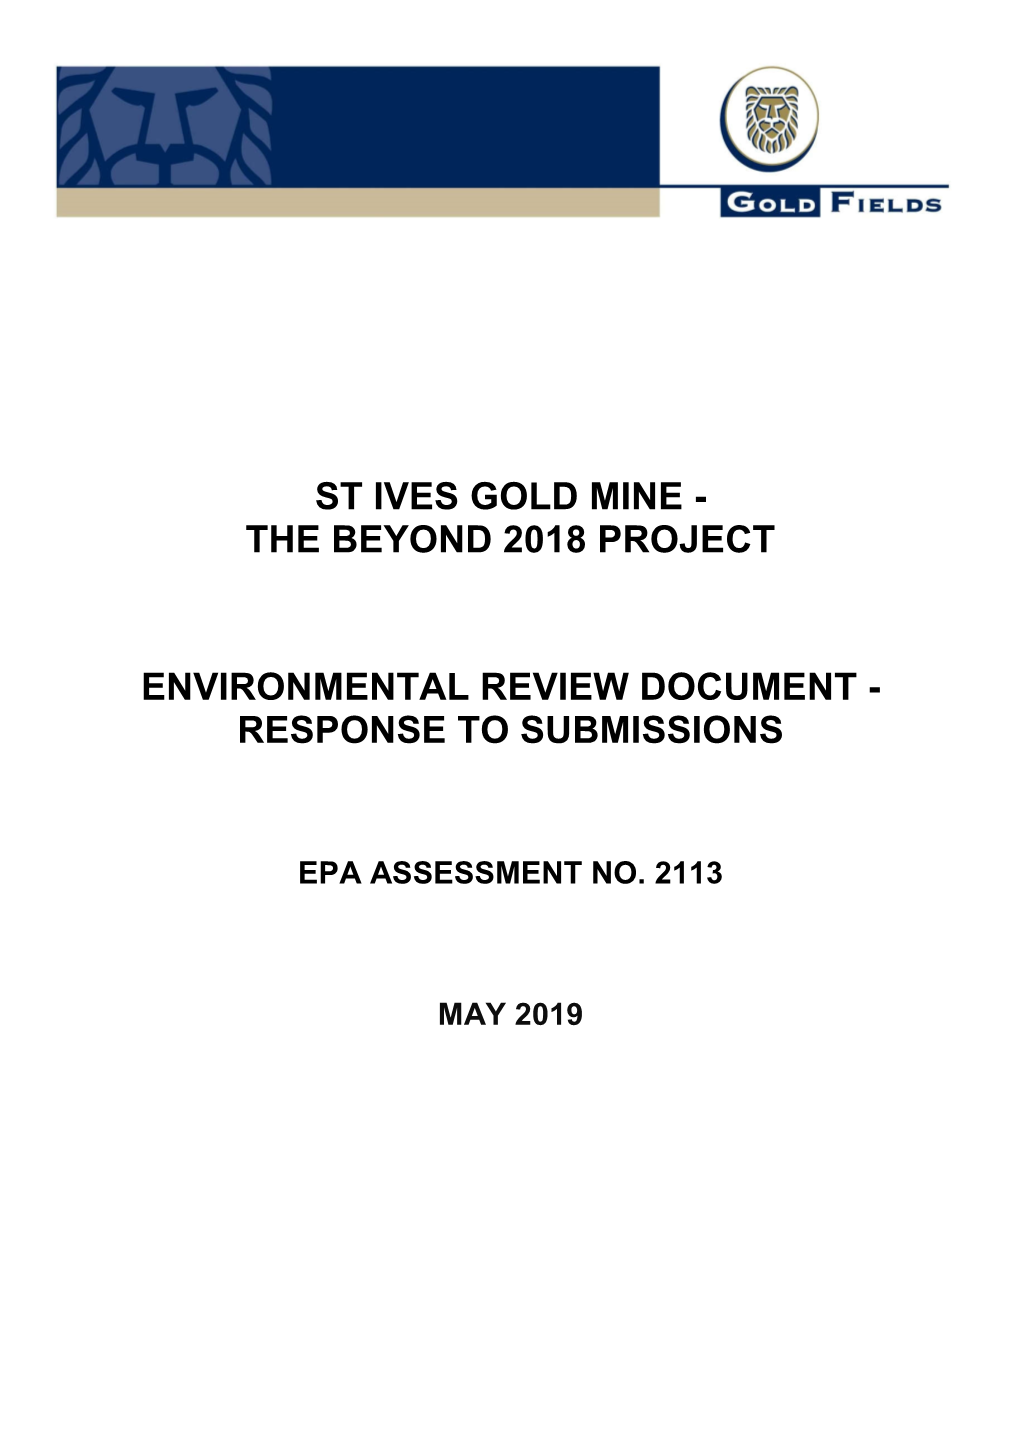 St Ives Gold Mine - the Beyond 2018 Project